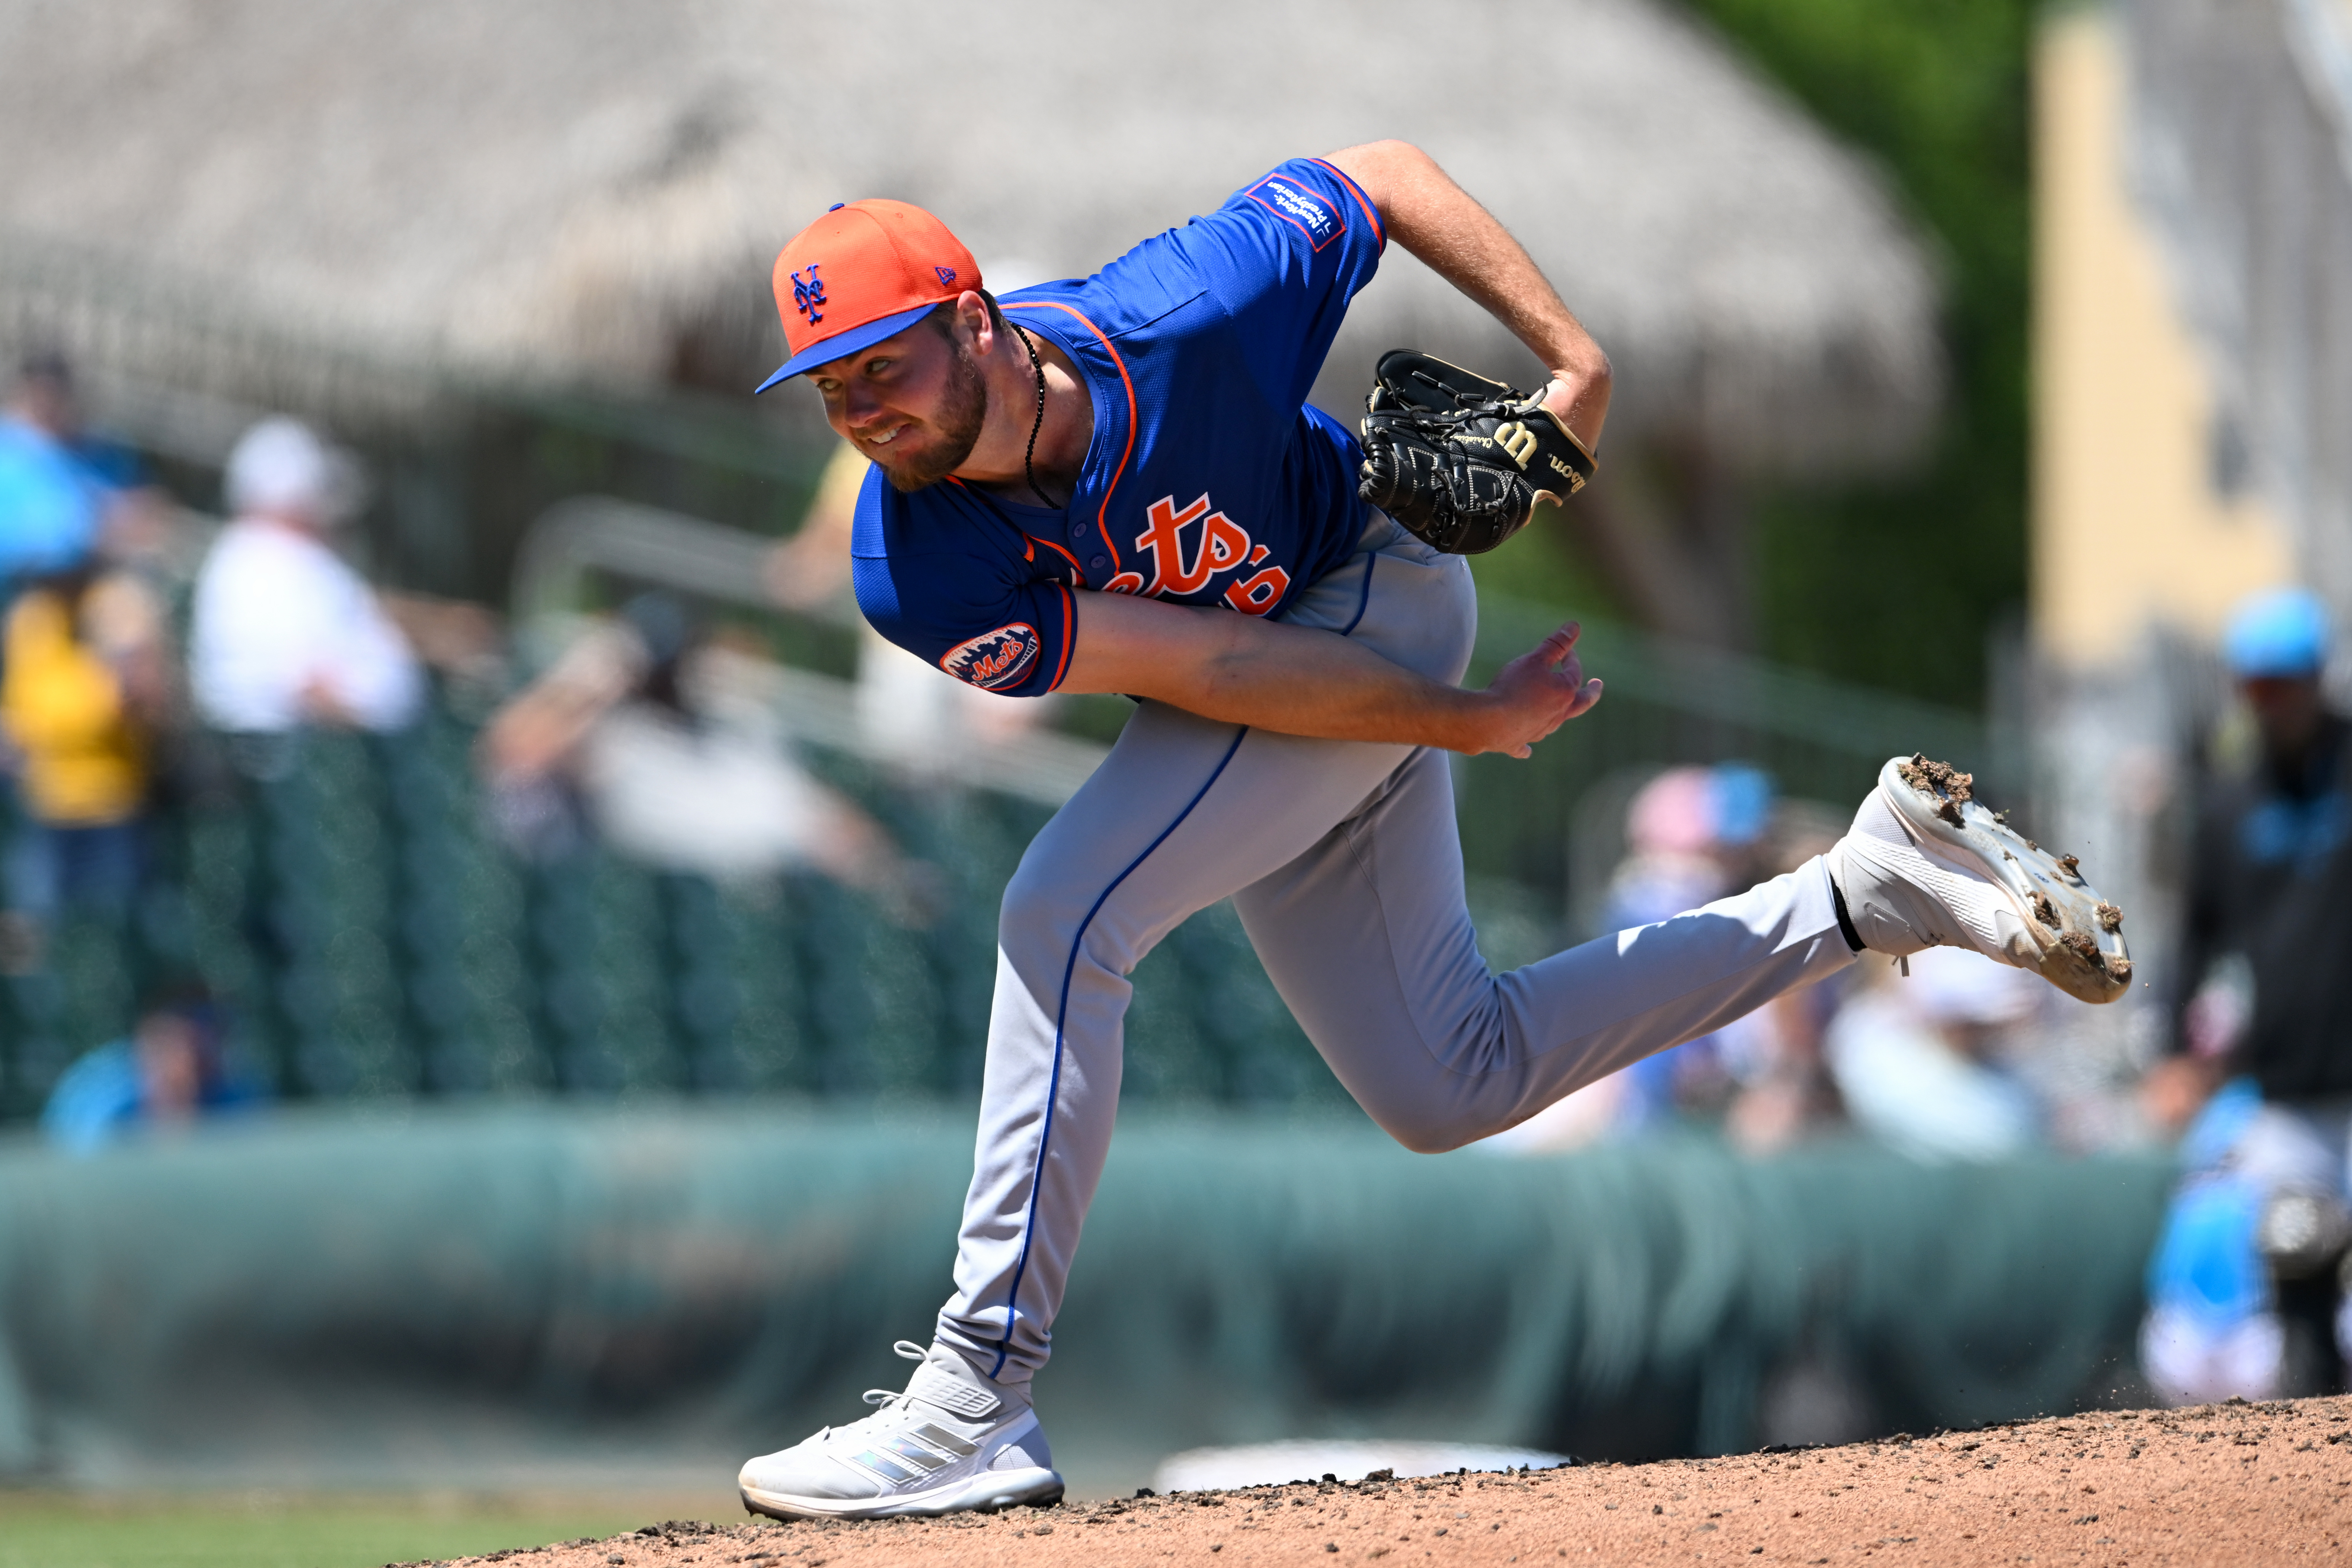 Christian Scott throws a pitch in a blue Mets jersey with an orange and blue hat.